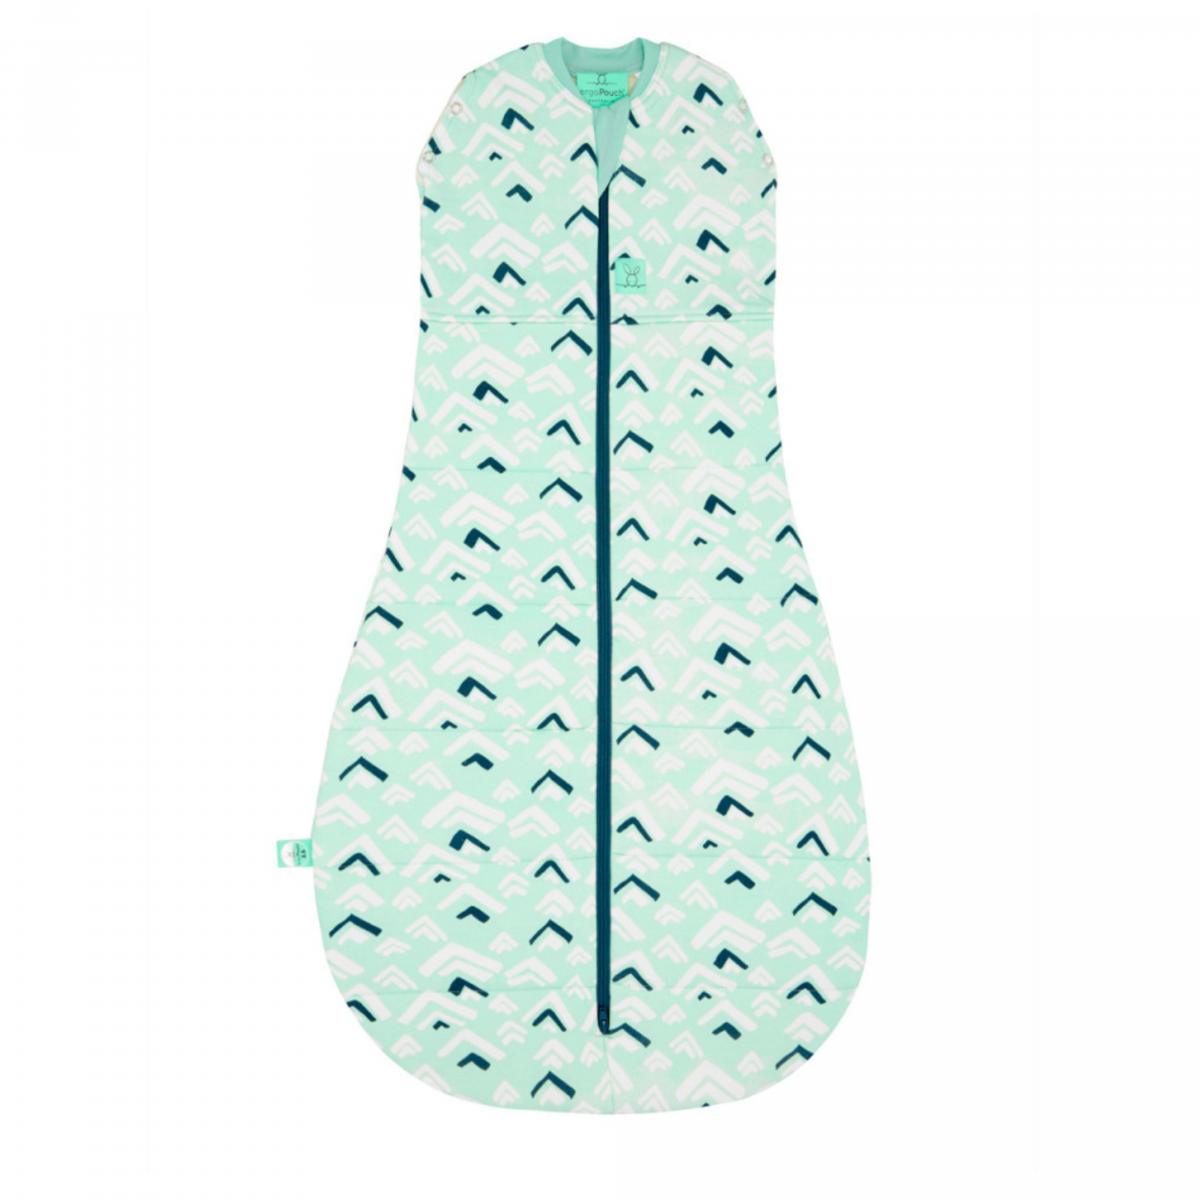 COCOON SWADDLE BAG 2.5 TOG - 0-3M - MOUNTAINS